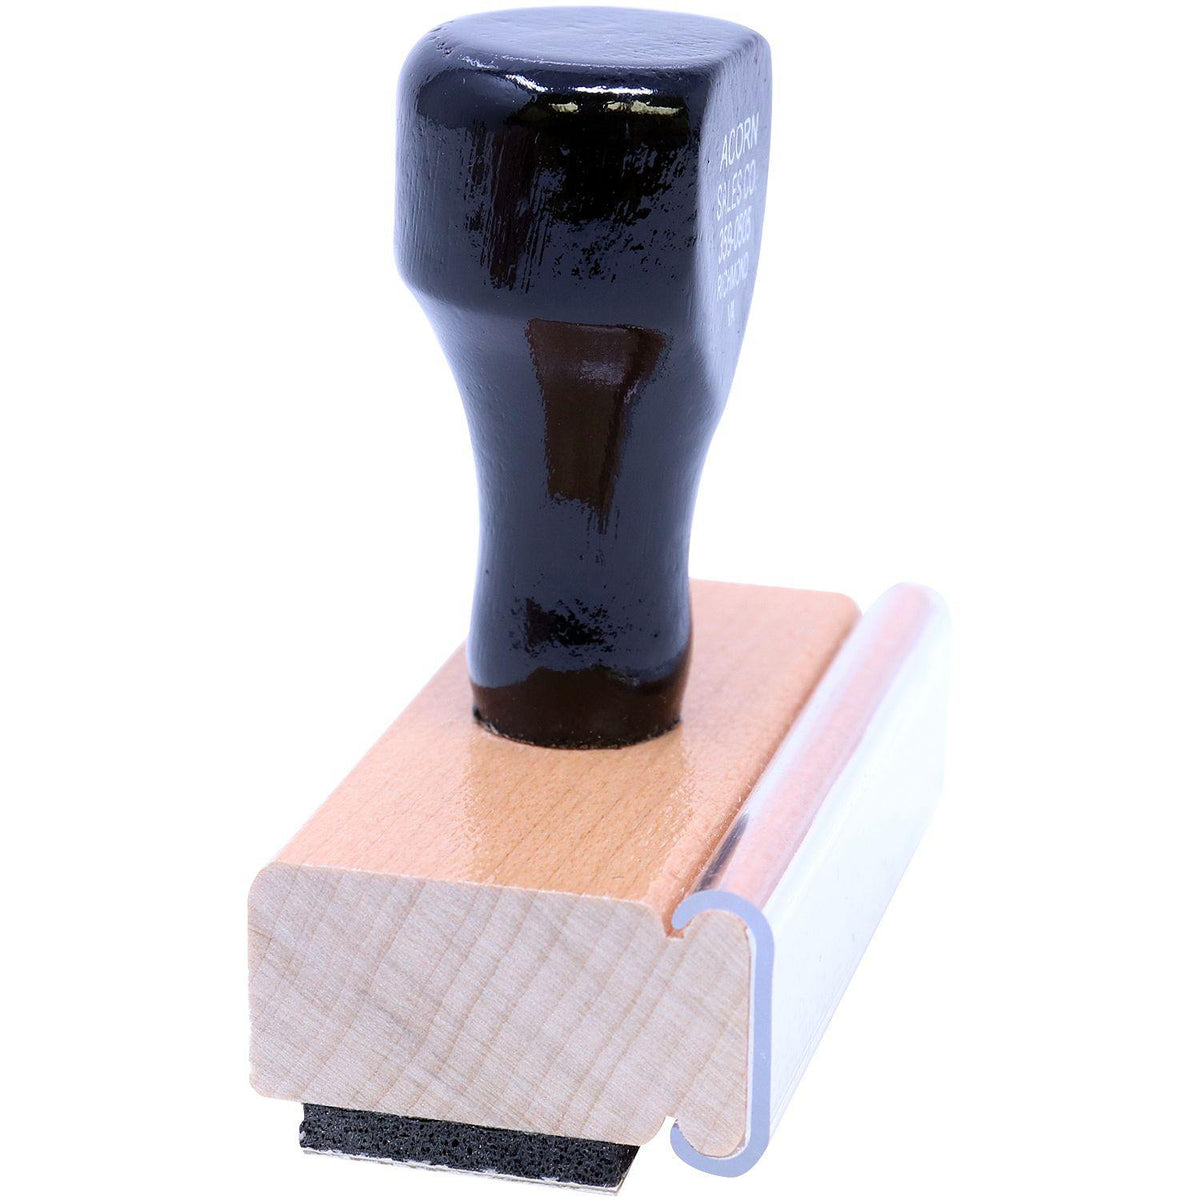 Side View of Large Personal Loans Rubber Stamp at an Angle